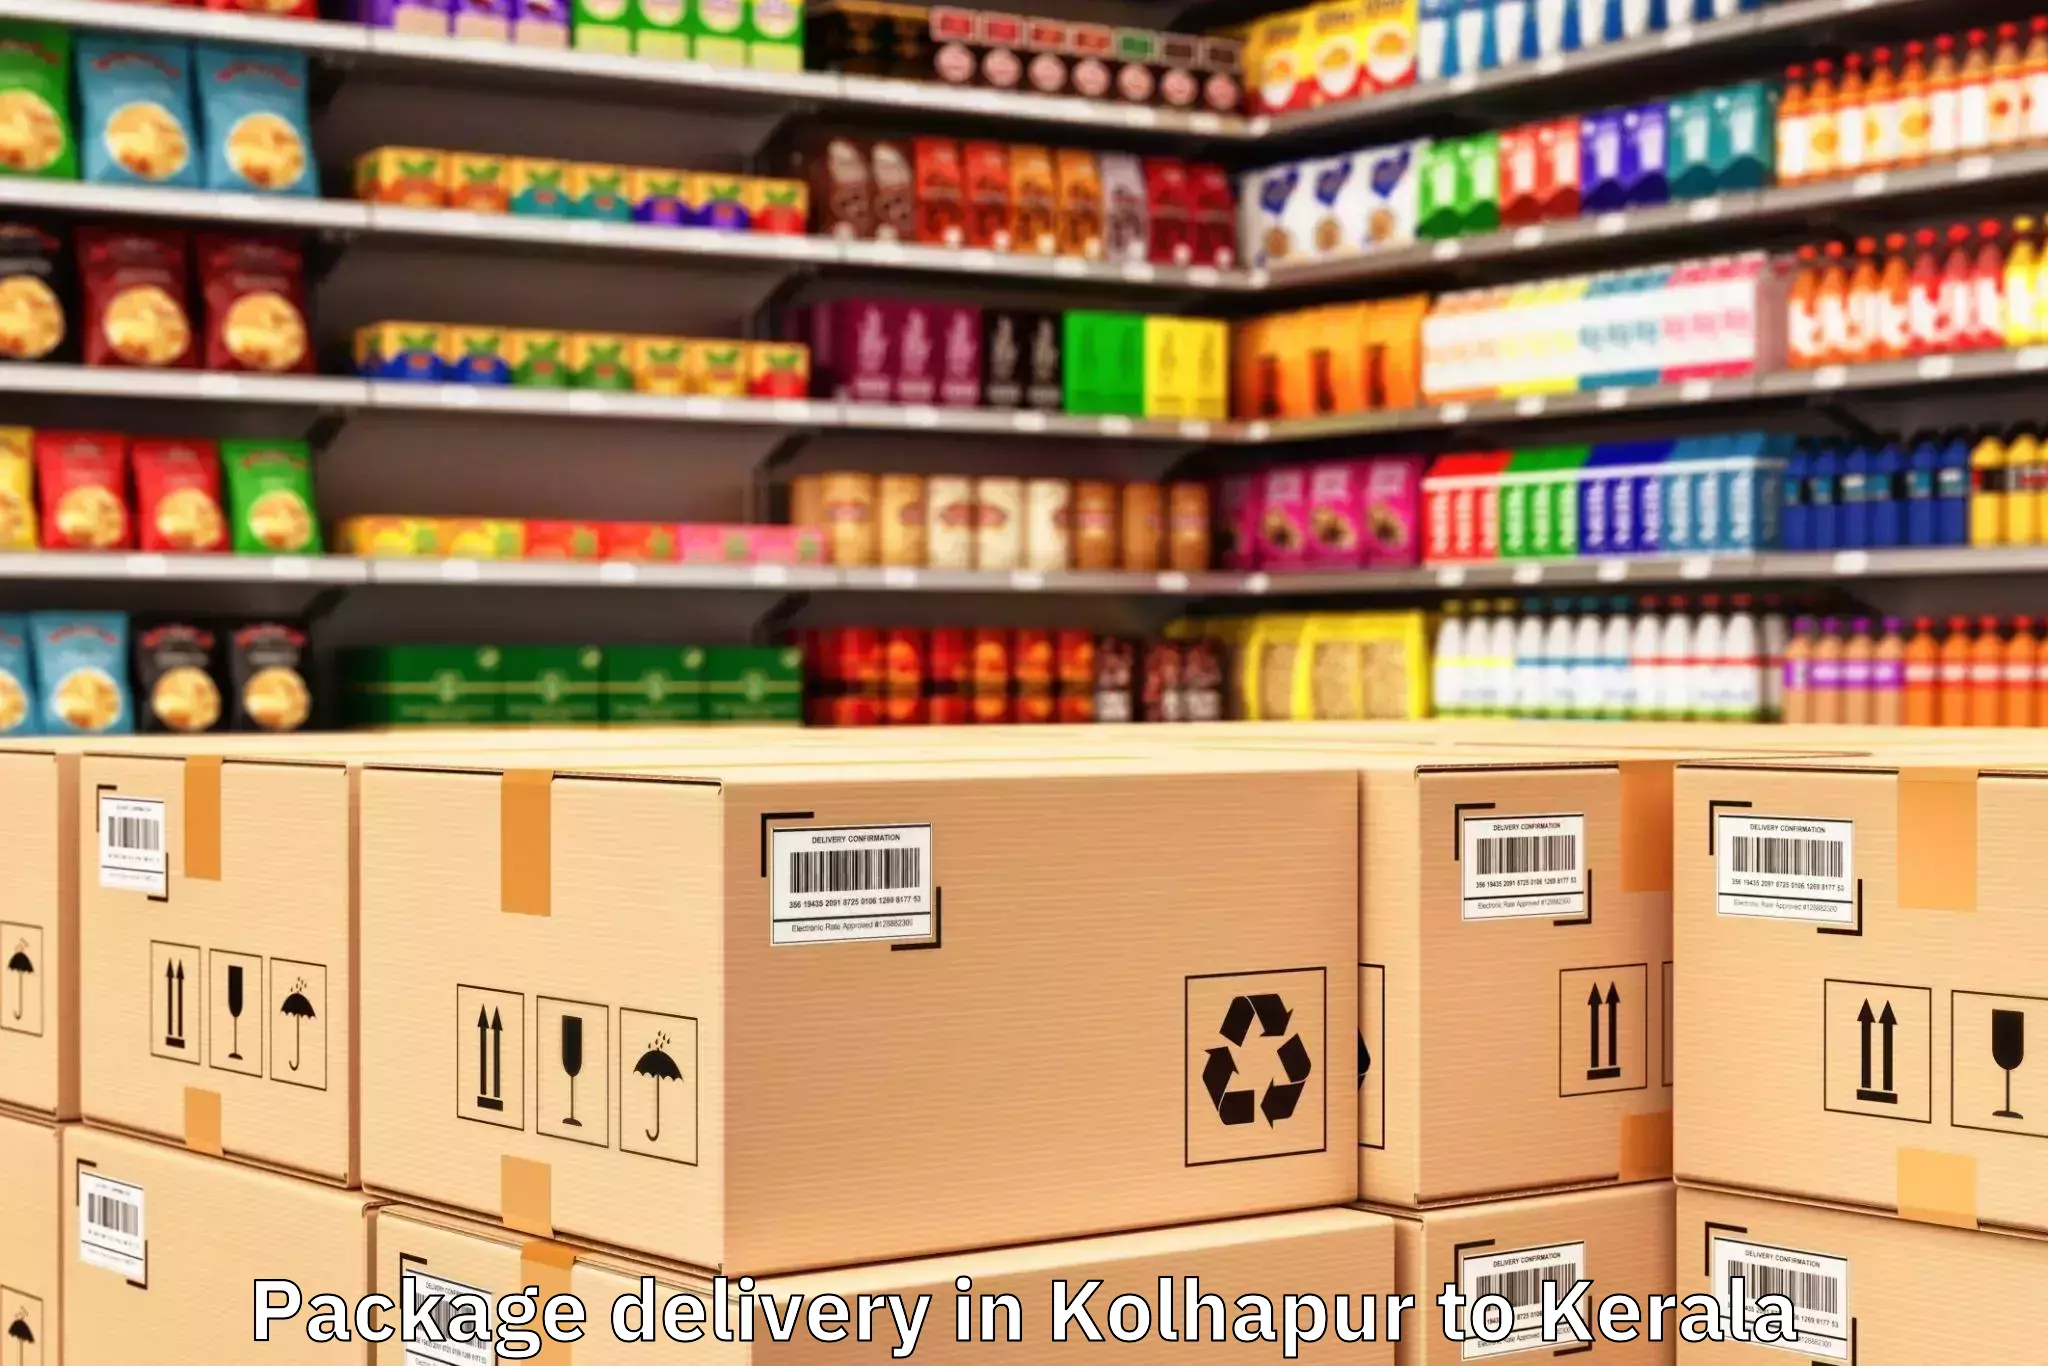 Kolhapur to Rp Mall Kollam Package Delivery Booking